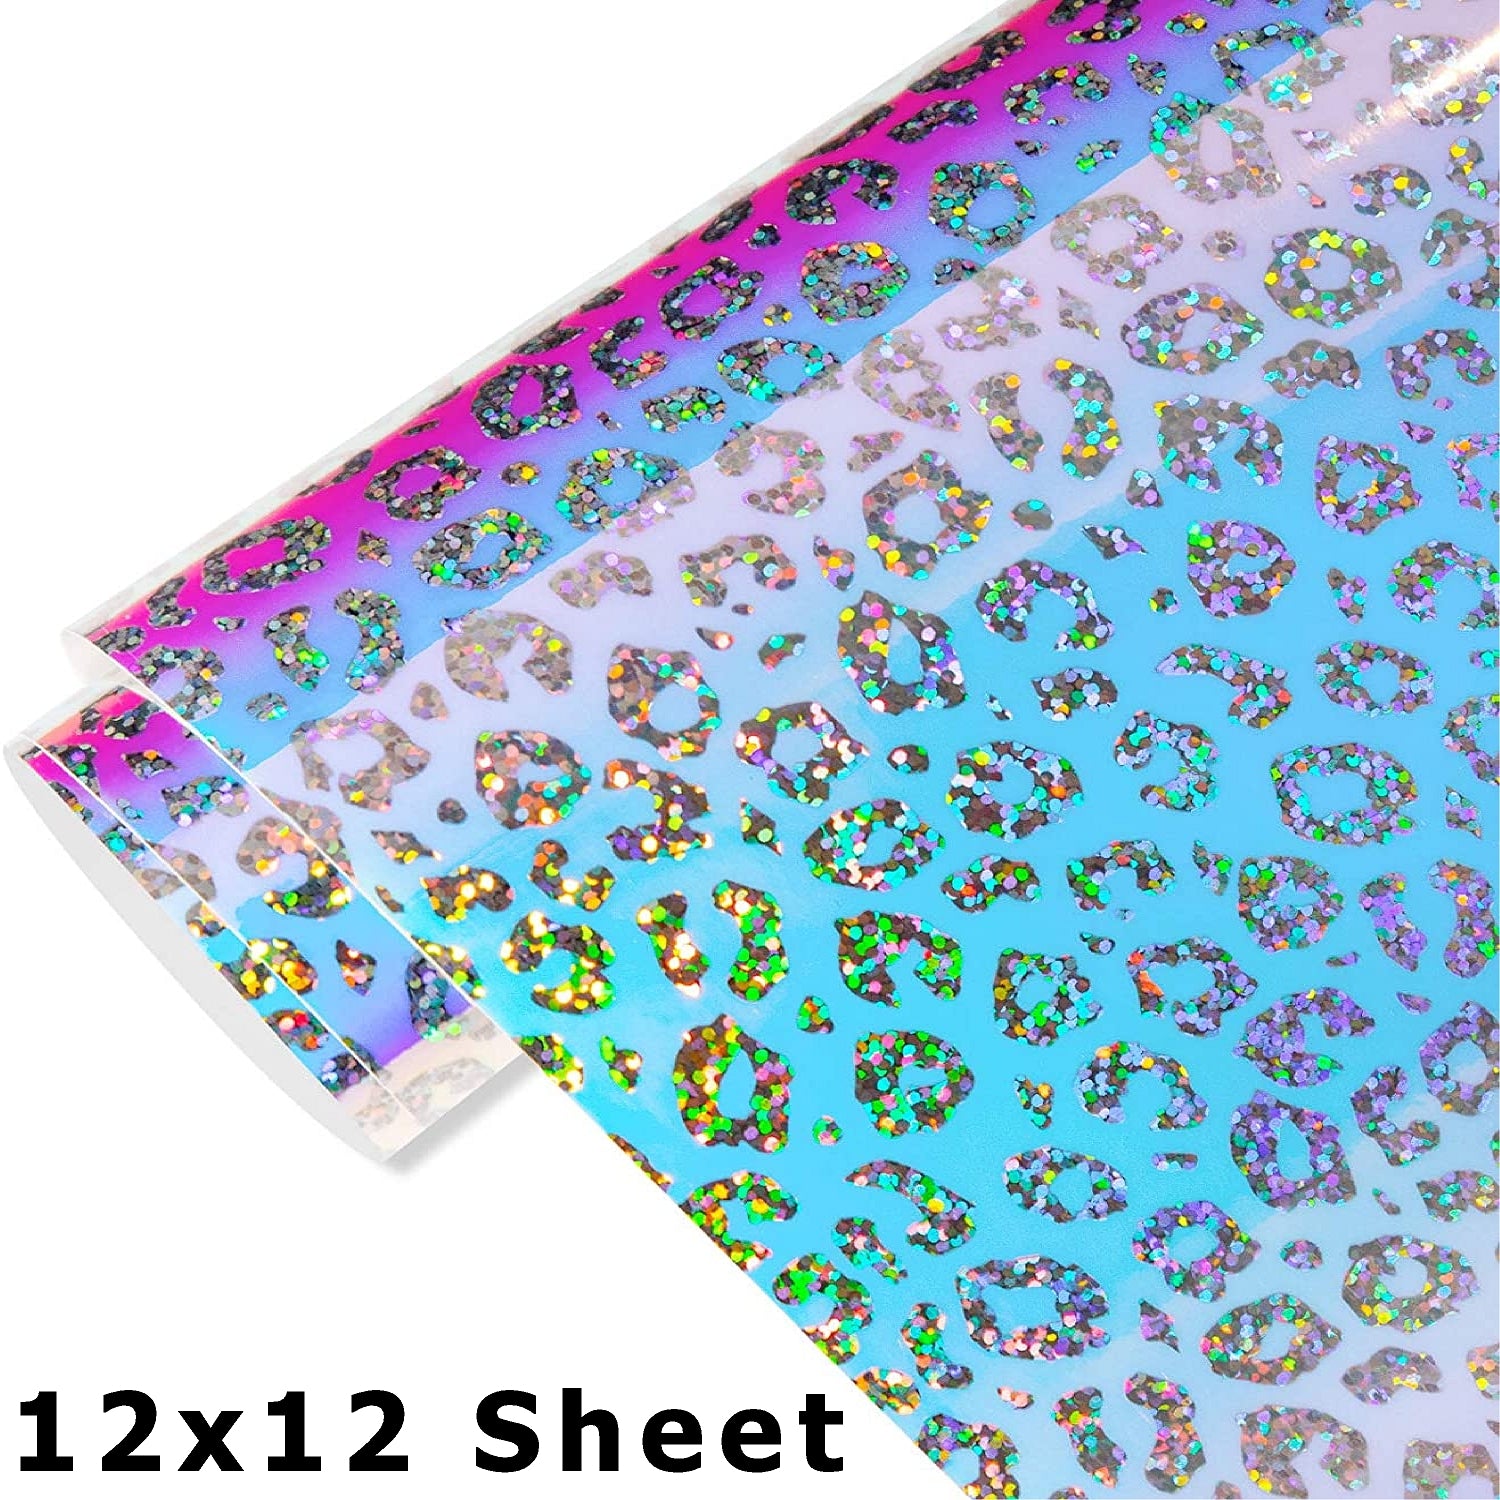 Glossy Holographic Opal Sheets Rainbow Adhesive Vinyl 12 x 12 Great for  Crafts Cricut DIY YX-3